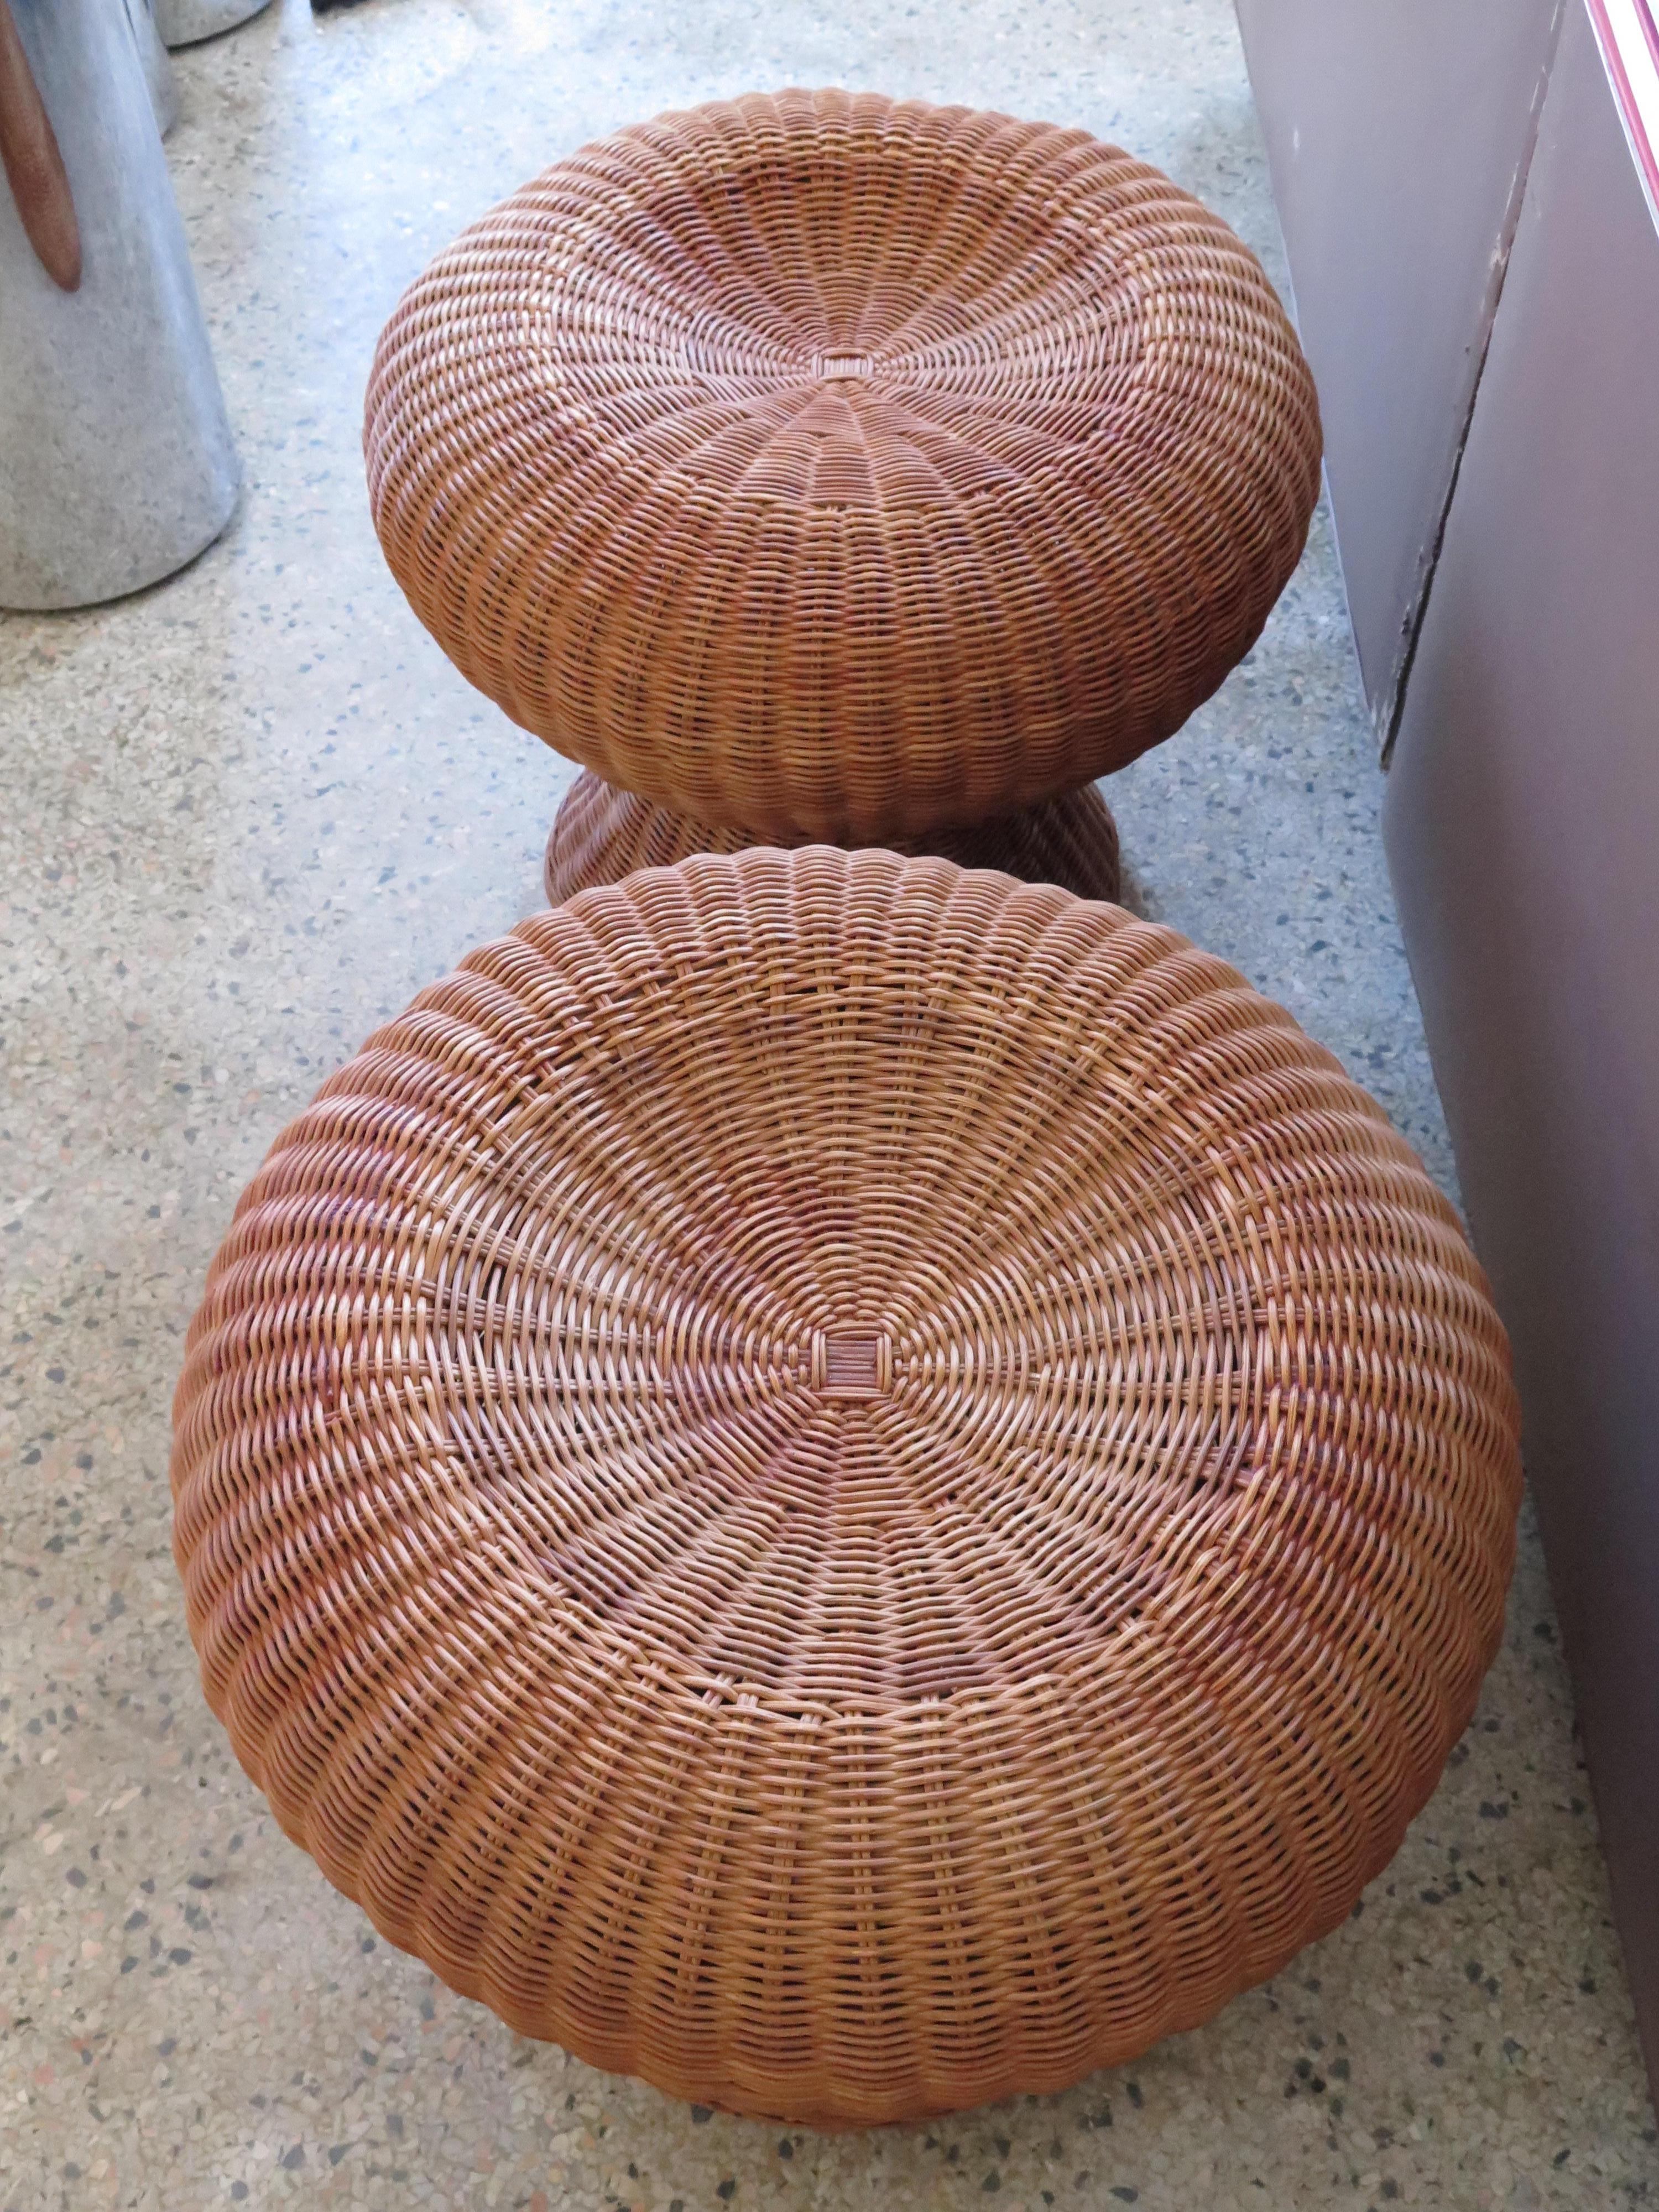 Late 20th Century A Pair of Wicker Mushroom Shaped Ottomans, circa 1970's For Sale